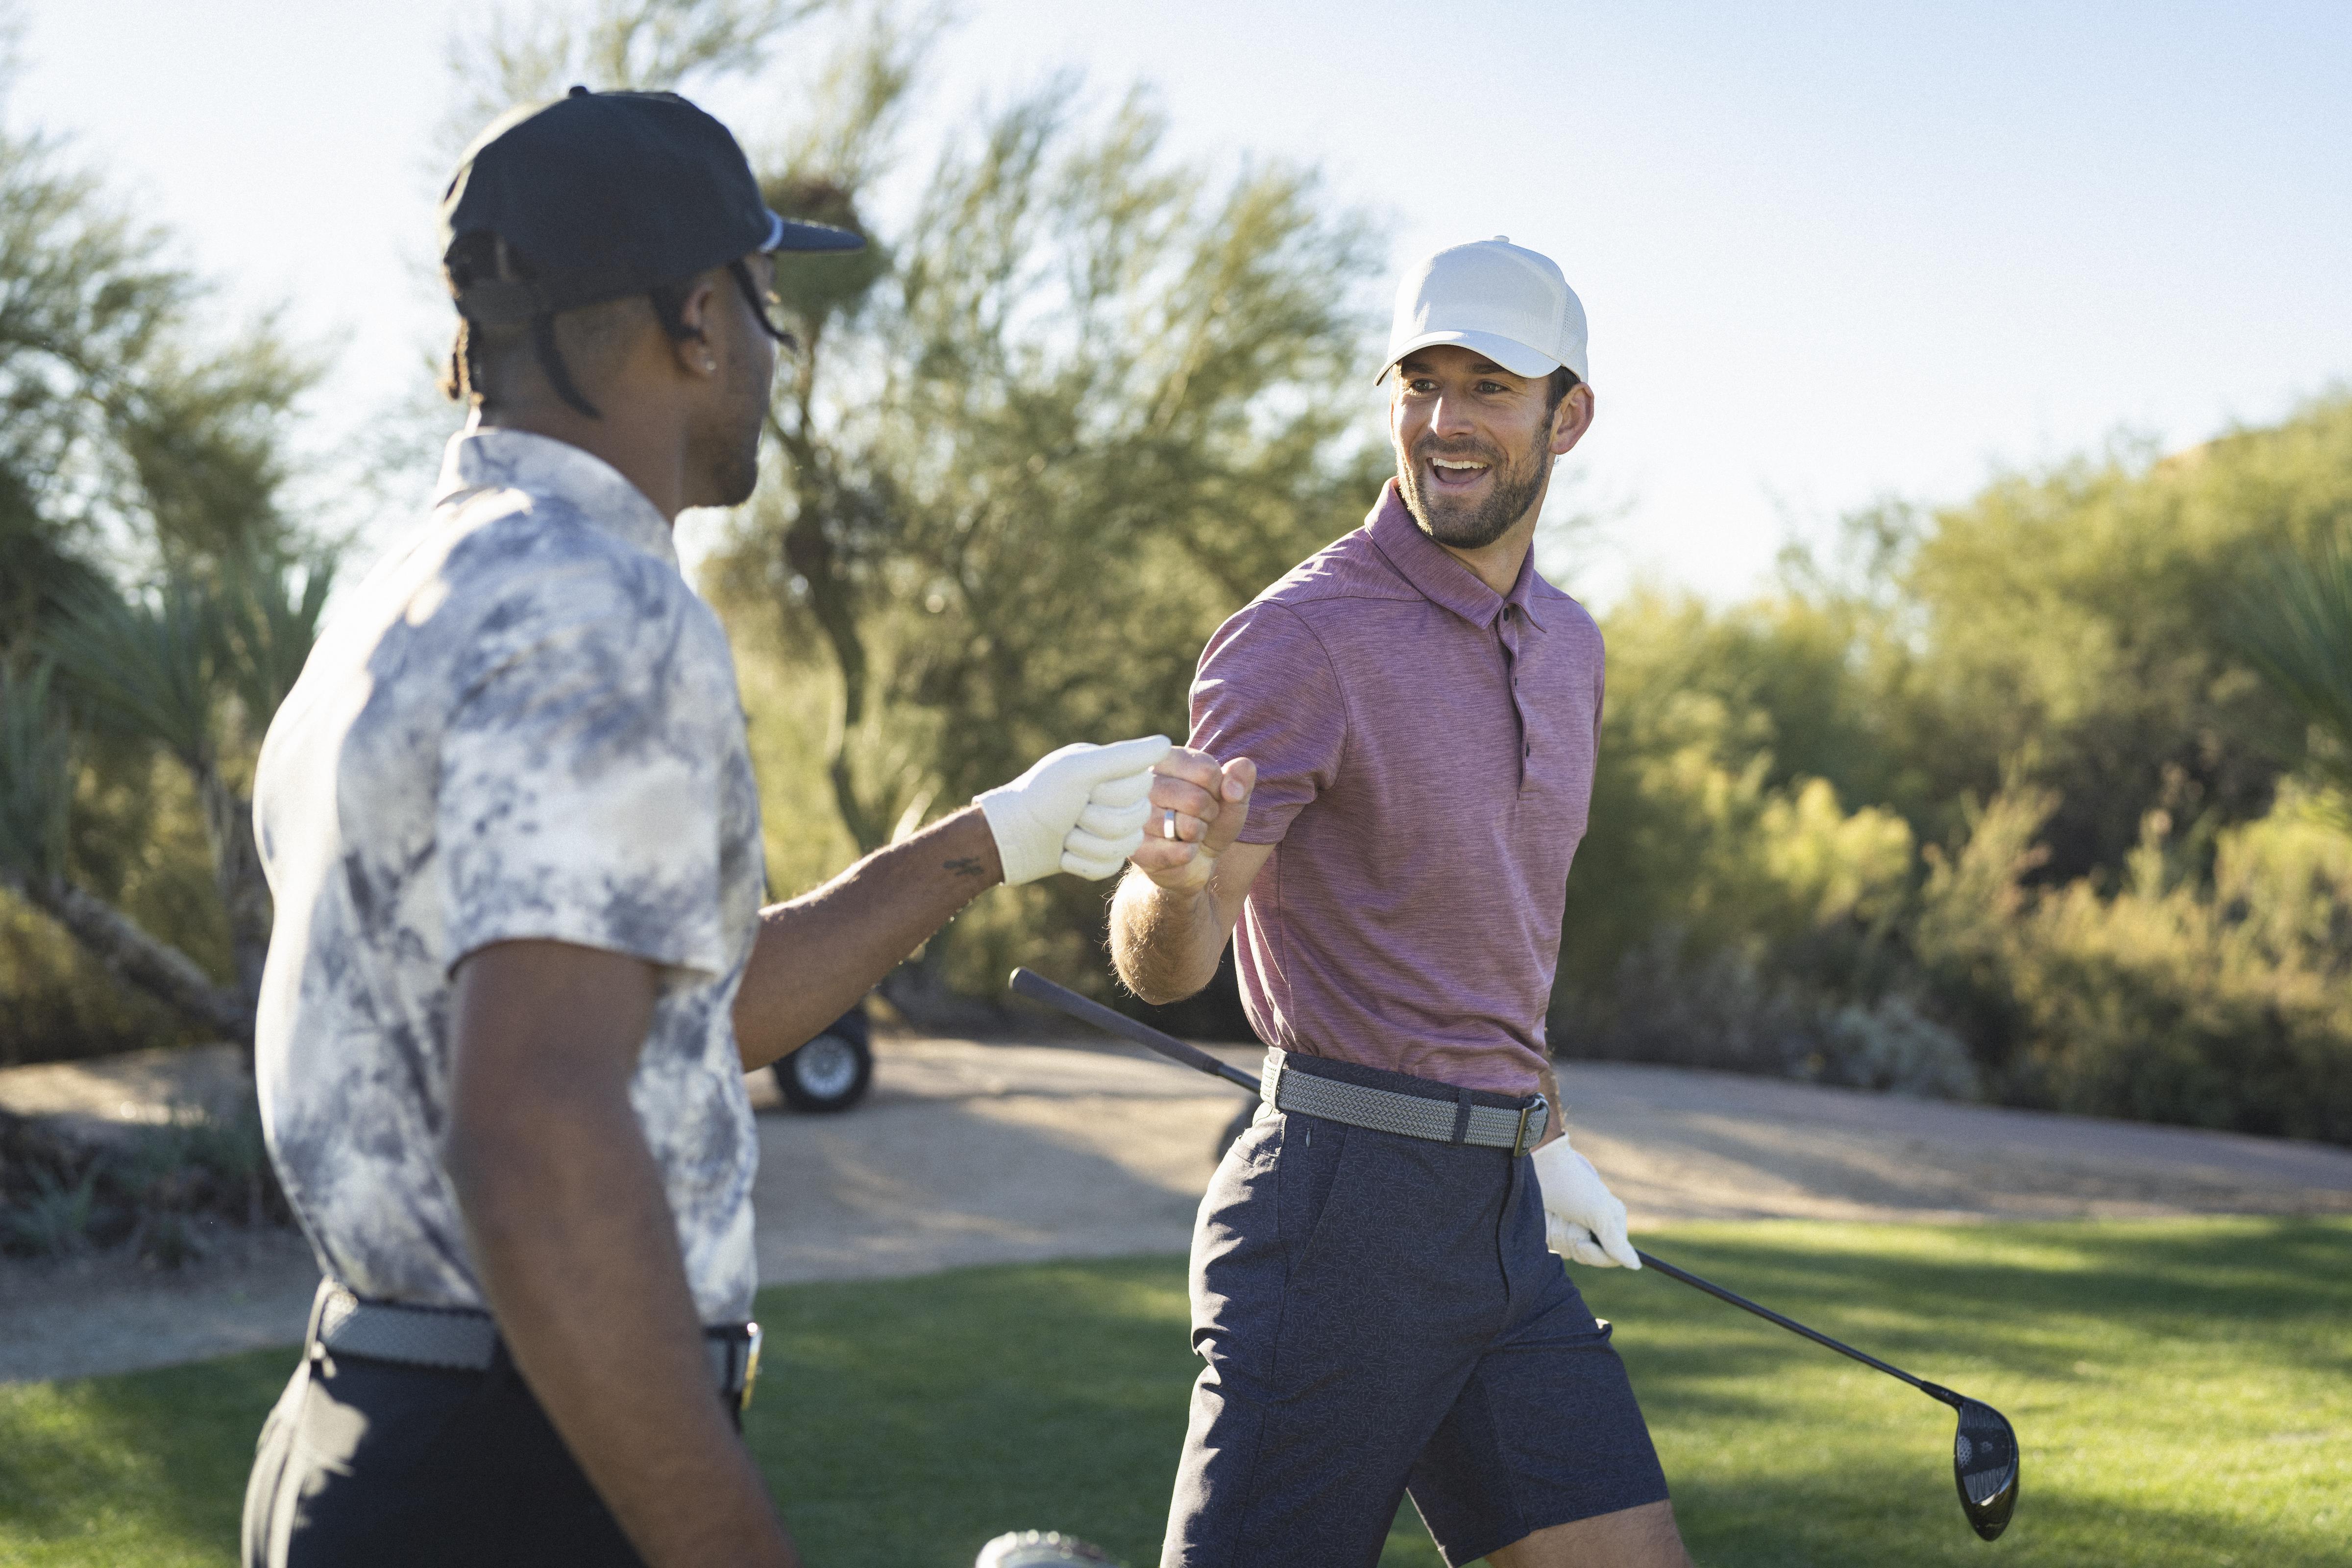 A look at the newest men's golf apparel line from Dick's Sporting Goods'  in-house golf design team, Golf Equipment: Clubs, Balls, Bags